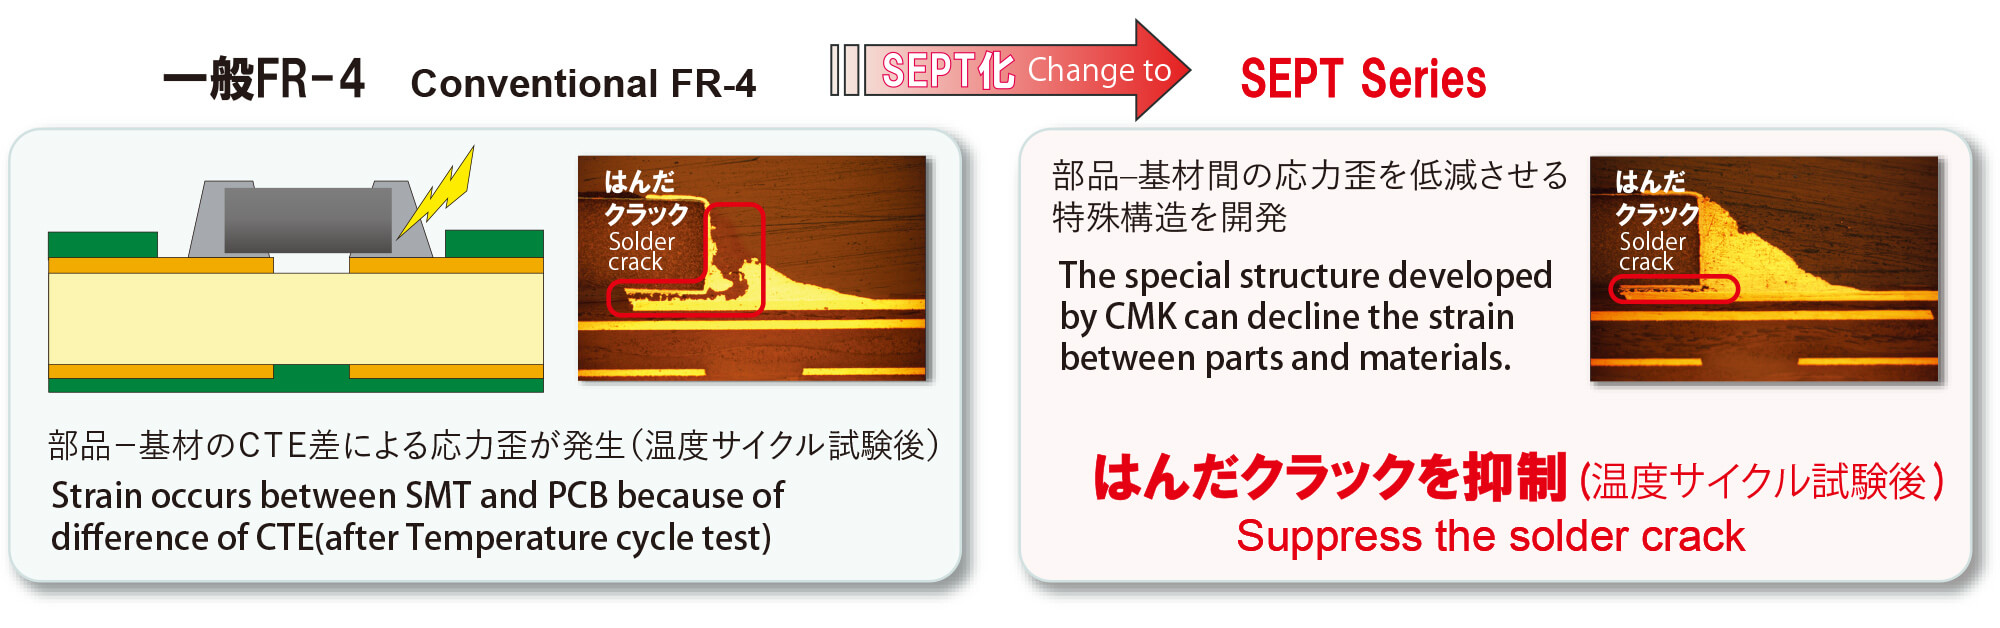 Conventional FR-4:Strain occurs between SMT and PCB because of difference of CTE (after Temperature cycle test) -> SEPT Series:The special structure developed by CMK can decline the strain between parts and materials. Suppress the solder crack. 